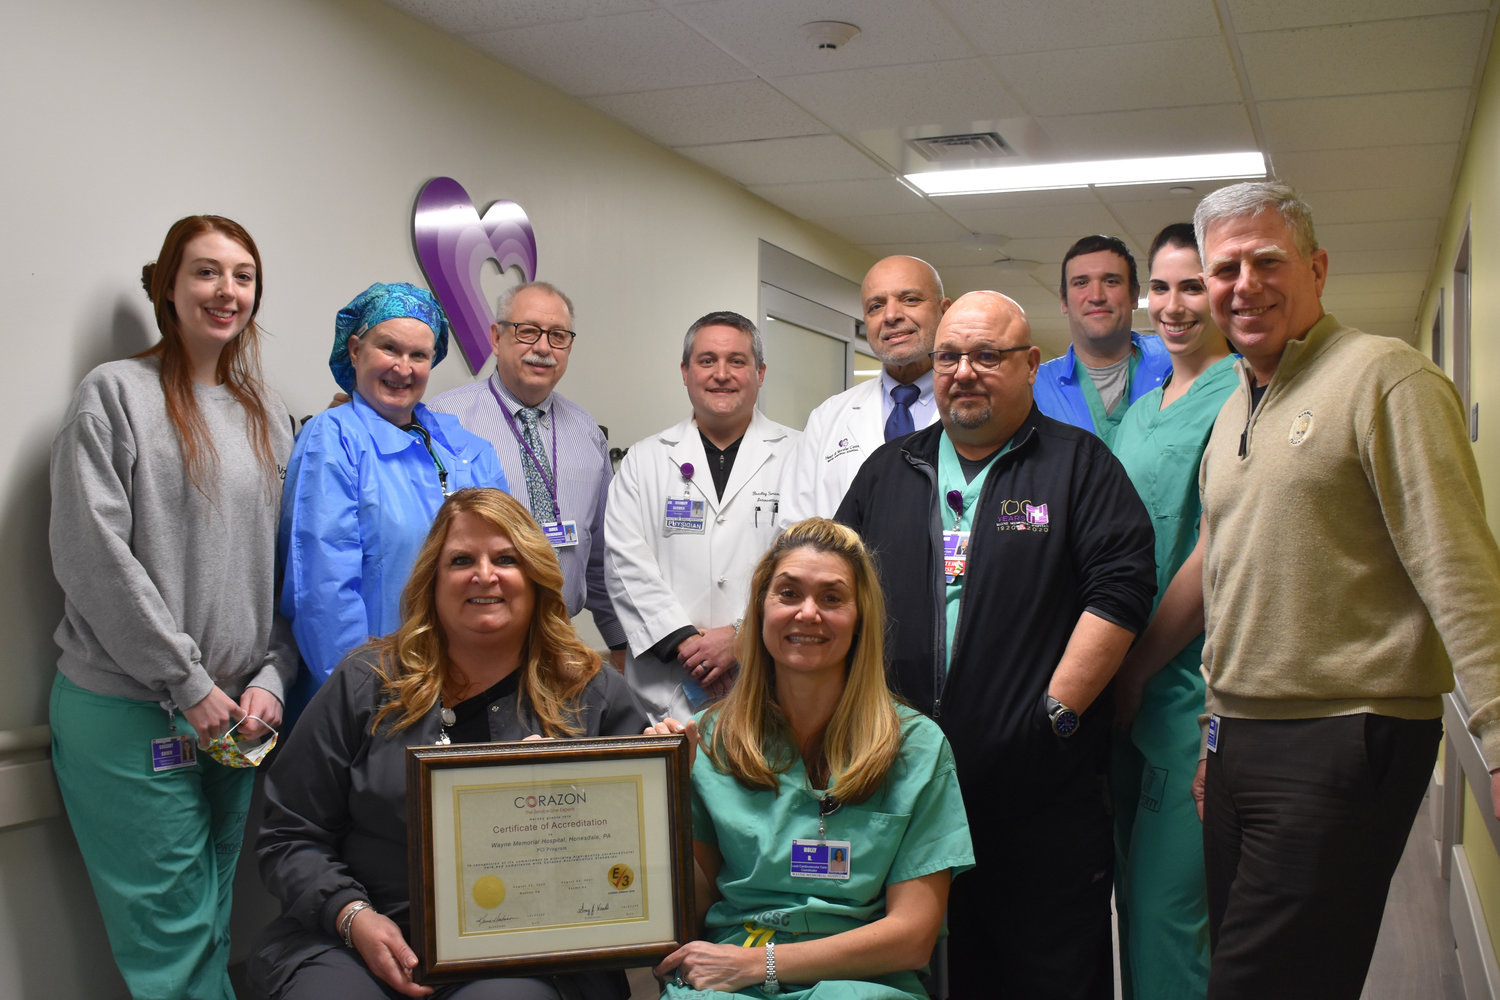 Wayne Memorial Hospital’s cardiac catheterization lab, the Heart and Vascular Center, has been re-accredited. Pictured are, standing: Cassidy Cohen, left; Colleen Shaffer; James Hockenbury; Dr. Bradley Serwer; Dr. Walid Hassan; Frank Reid; Chris Fehnel; Kristen Schmale; and Rob Brzuchalski. Seated are Sandra Skrobiszewski, left, and Holly Reddock.